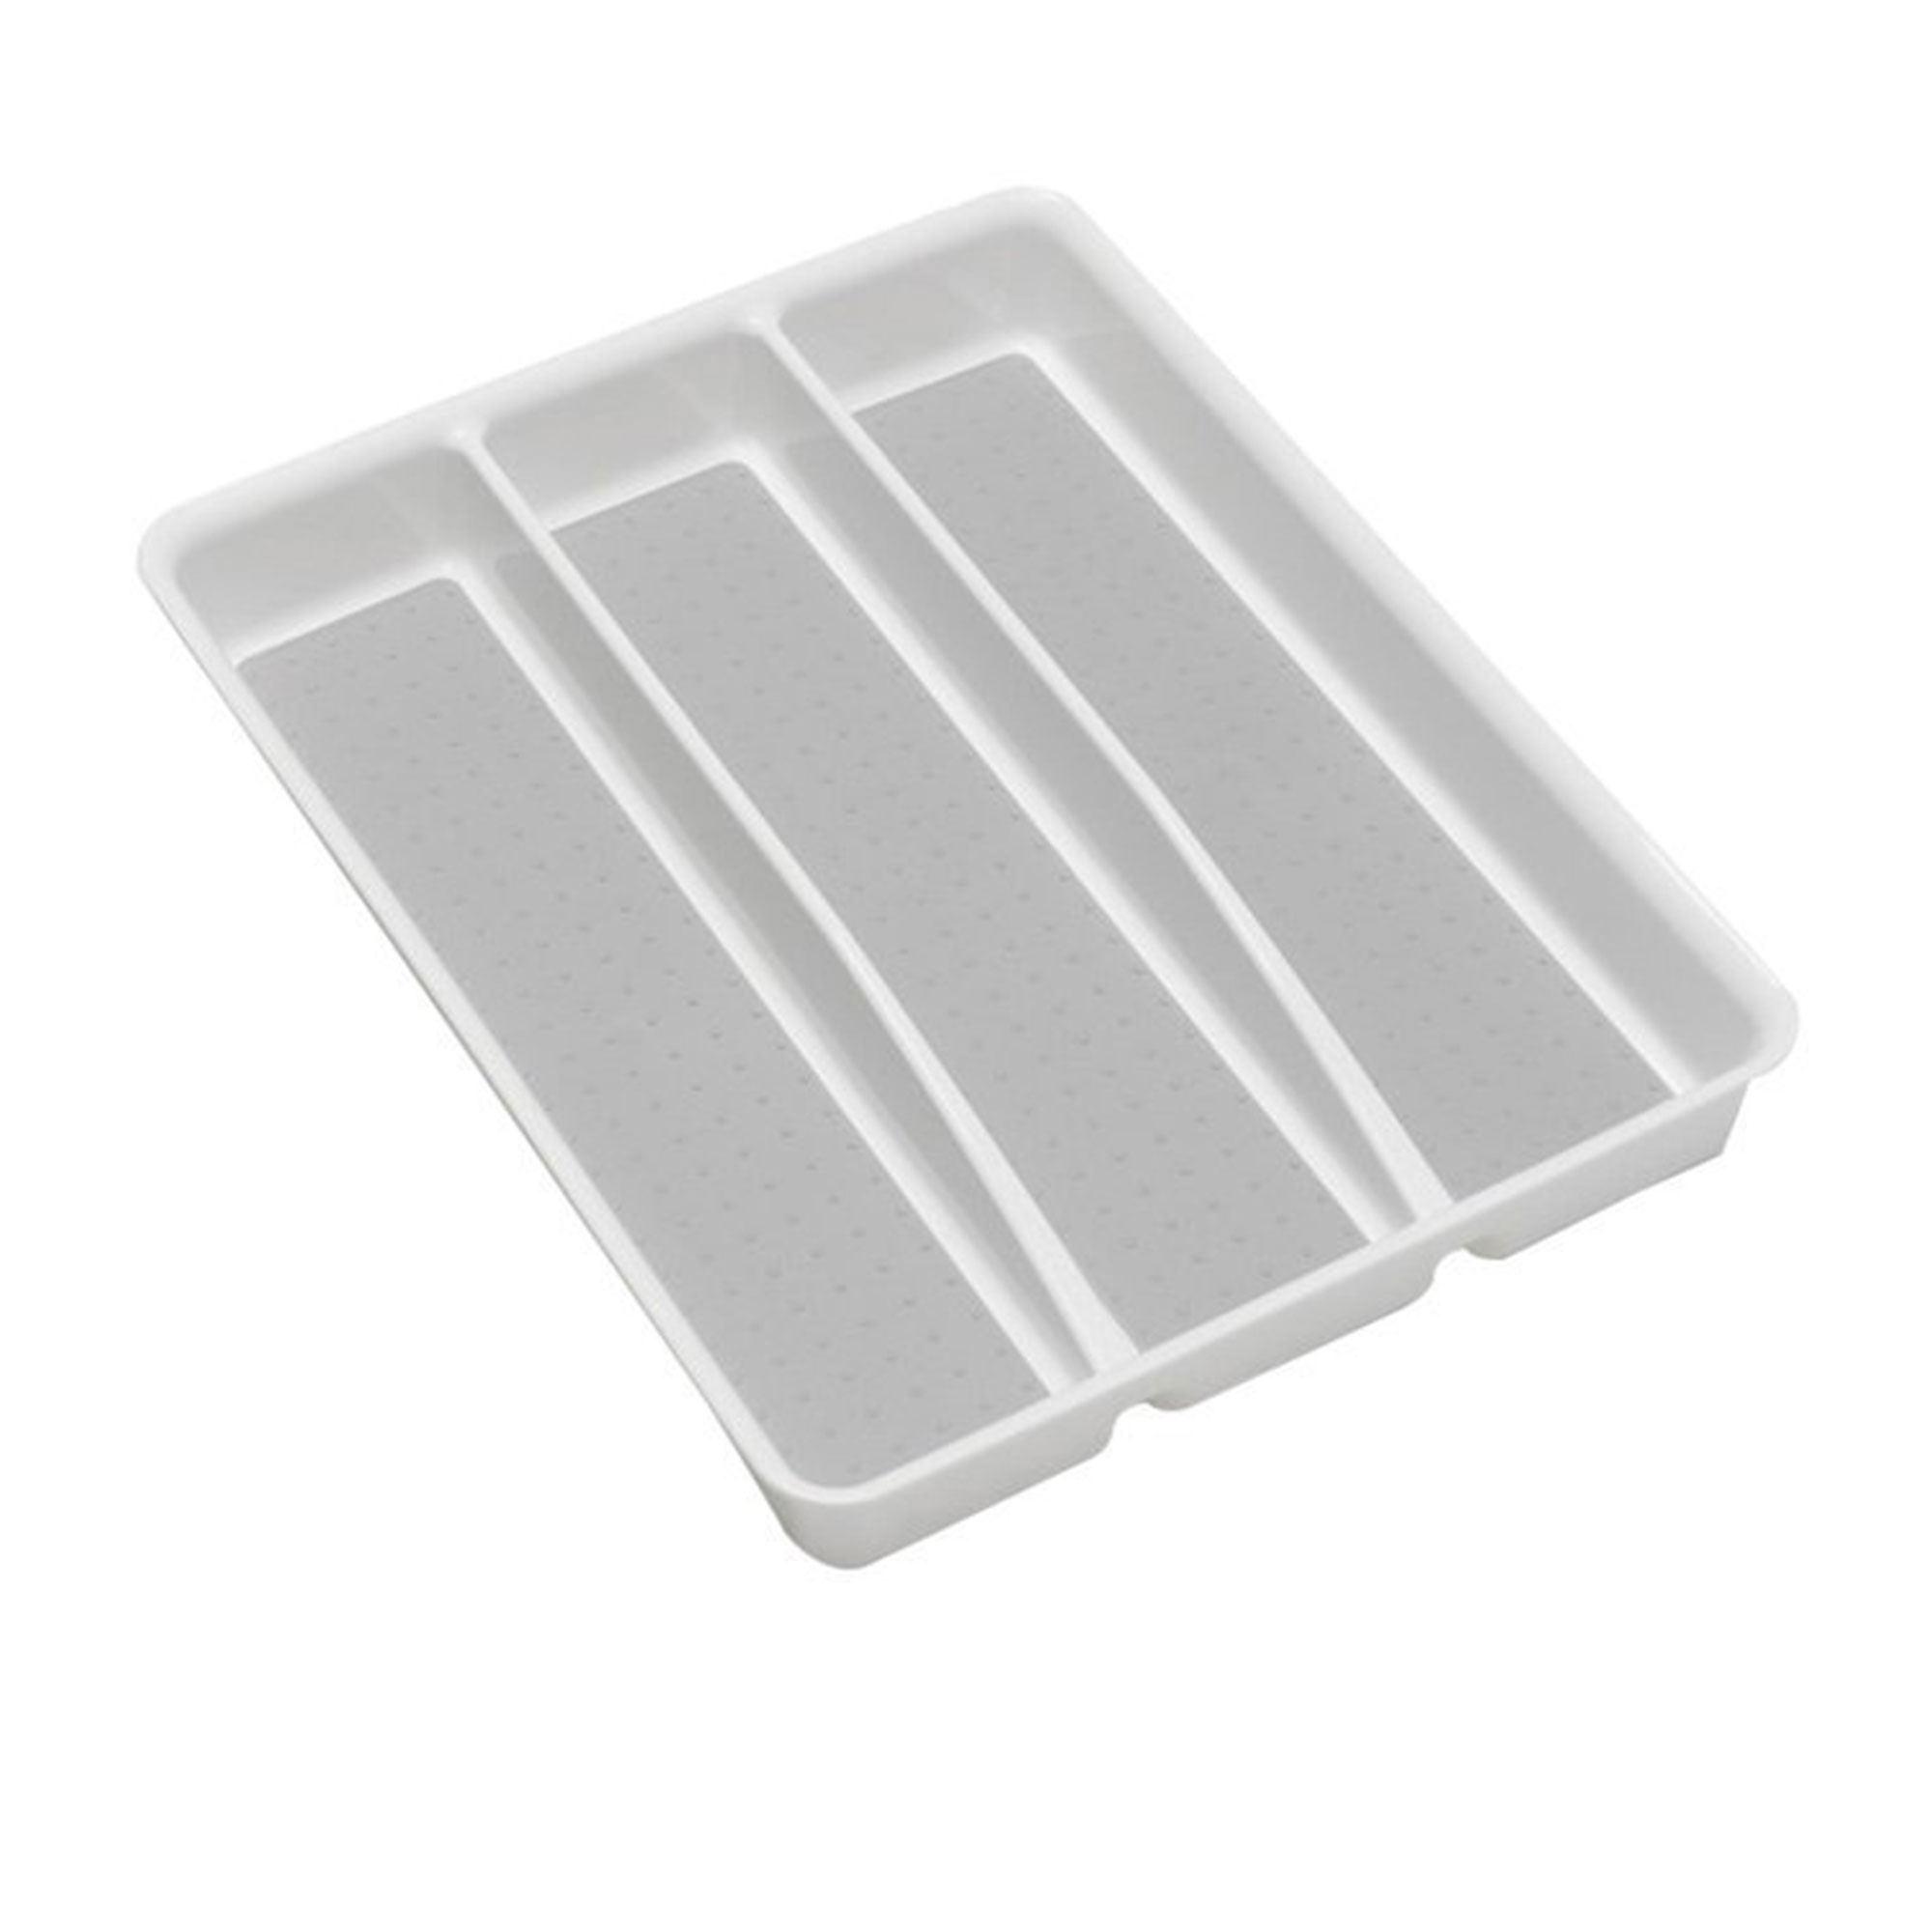 Madesmart Utensil Tray 3 Compartment White Image 1